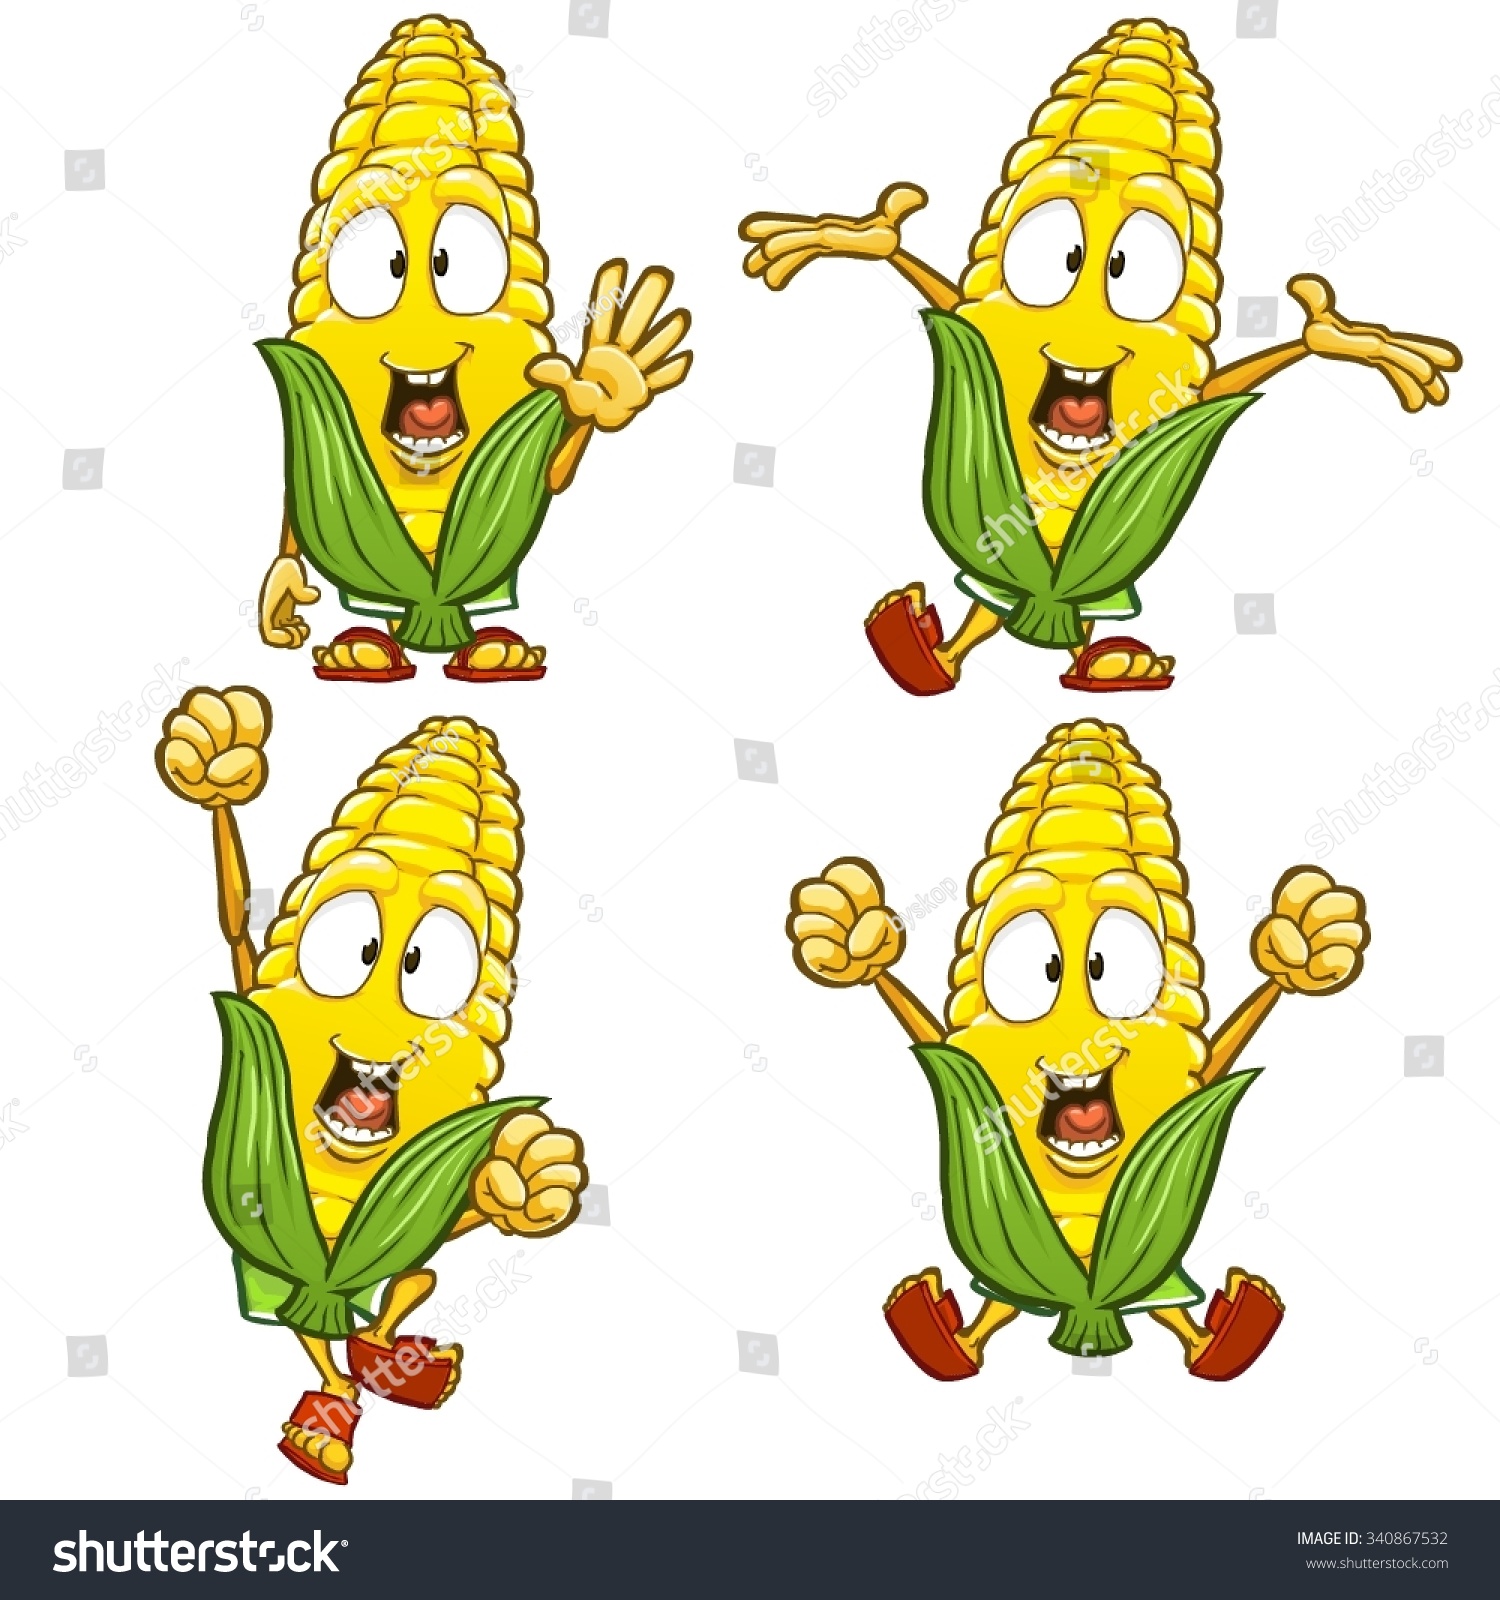 Very adorable corn character set with different poses and emotions isolated on white background